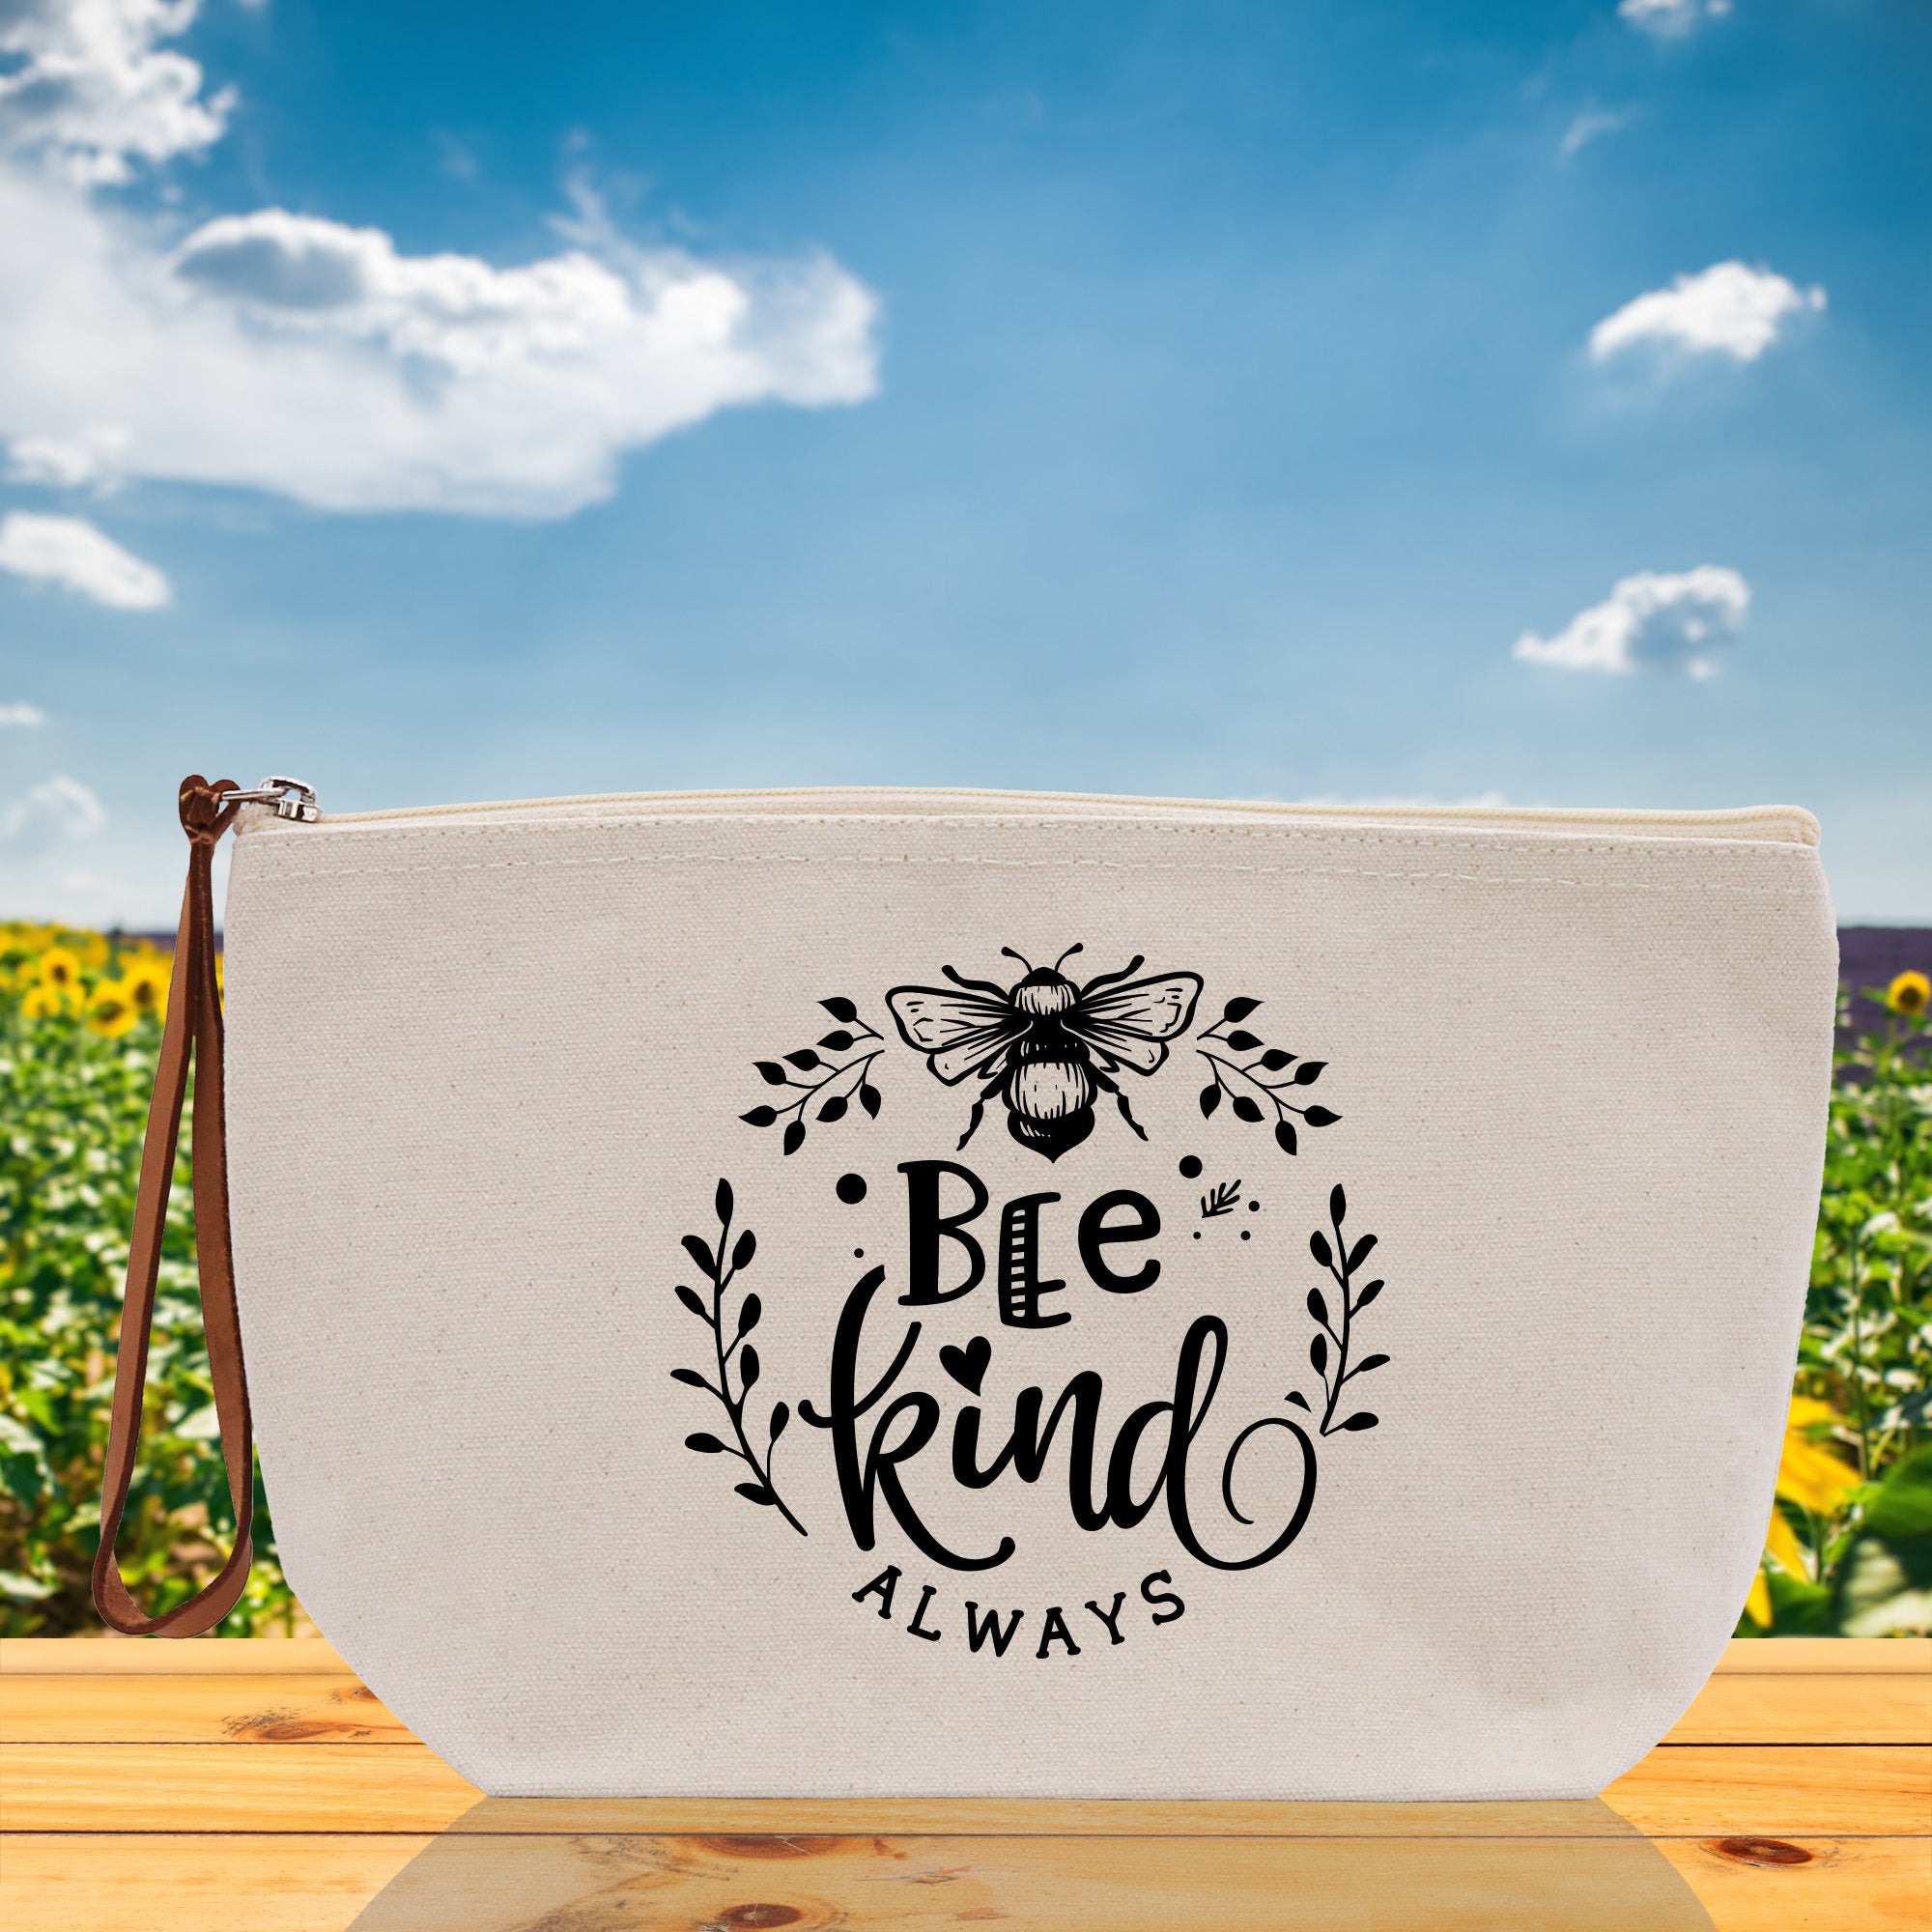 Bee Kind Zipper Cotton Canvas Zipper Pouch Bag Always Bee Kind Makeup Case Custom Zipper Pouch Tote Toiletry Bag Gift for Her Birthday Gift